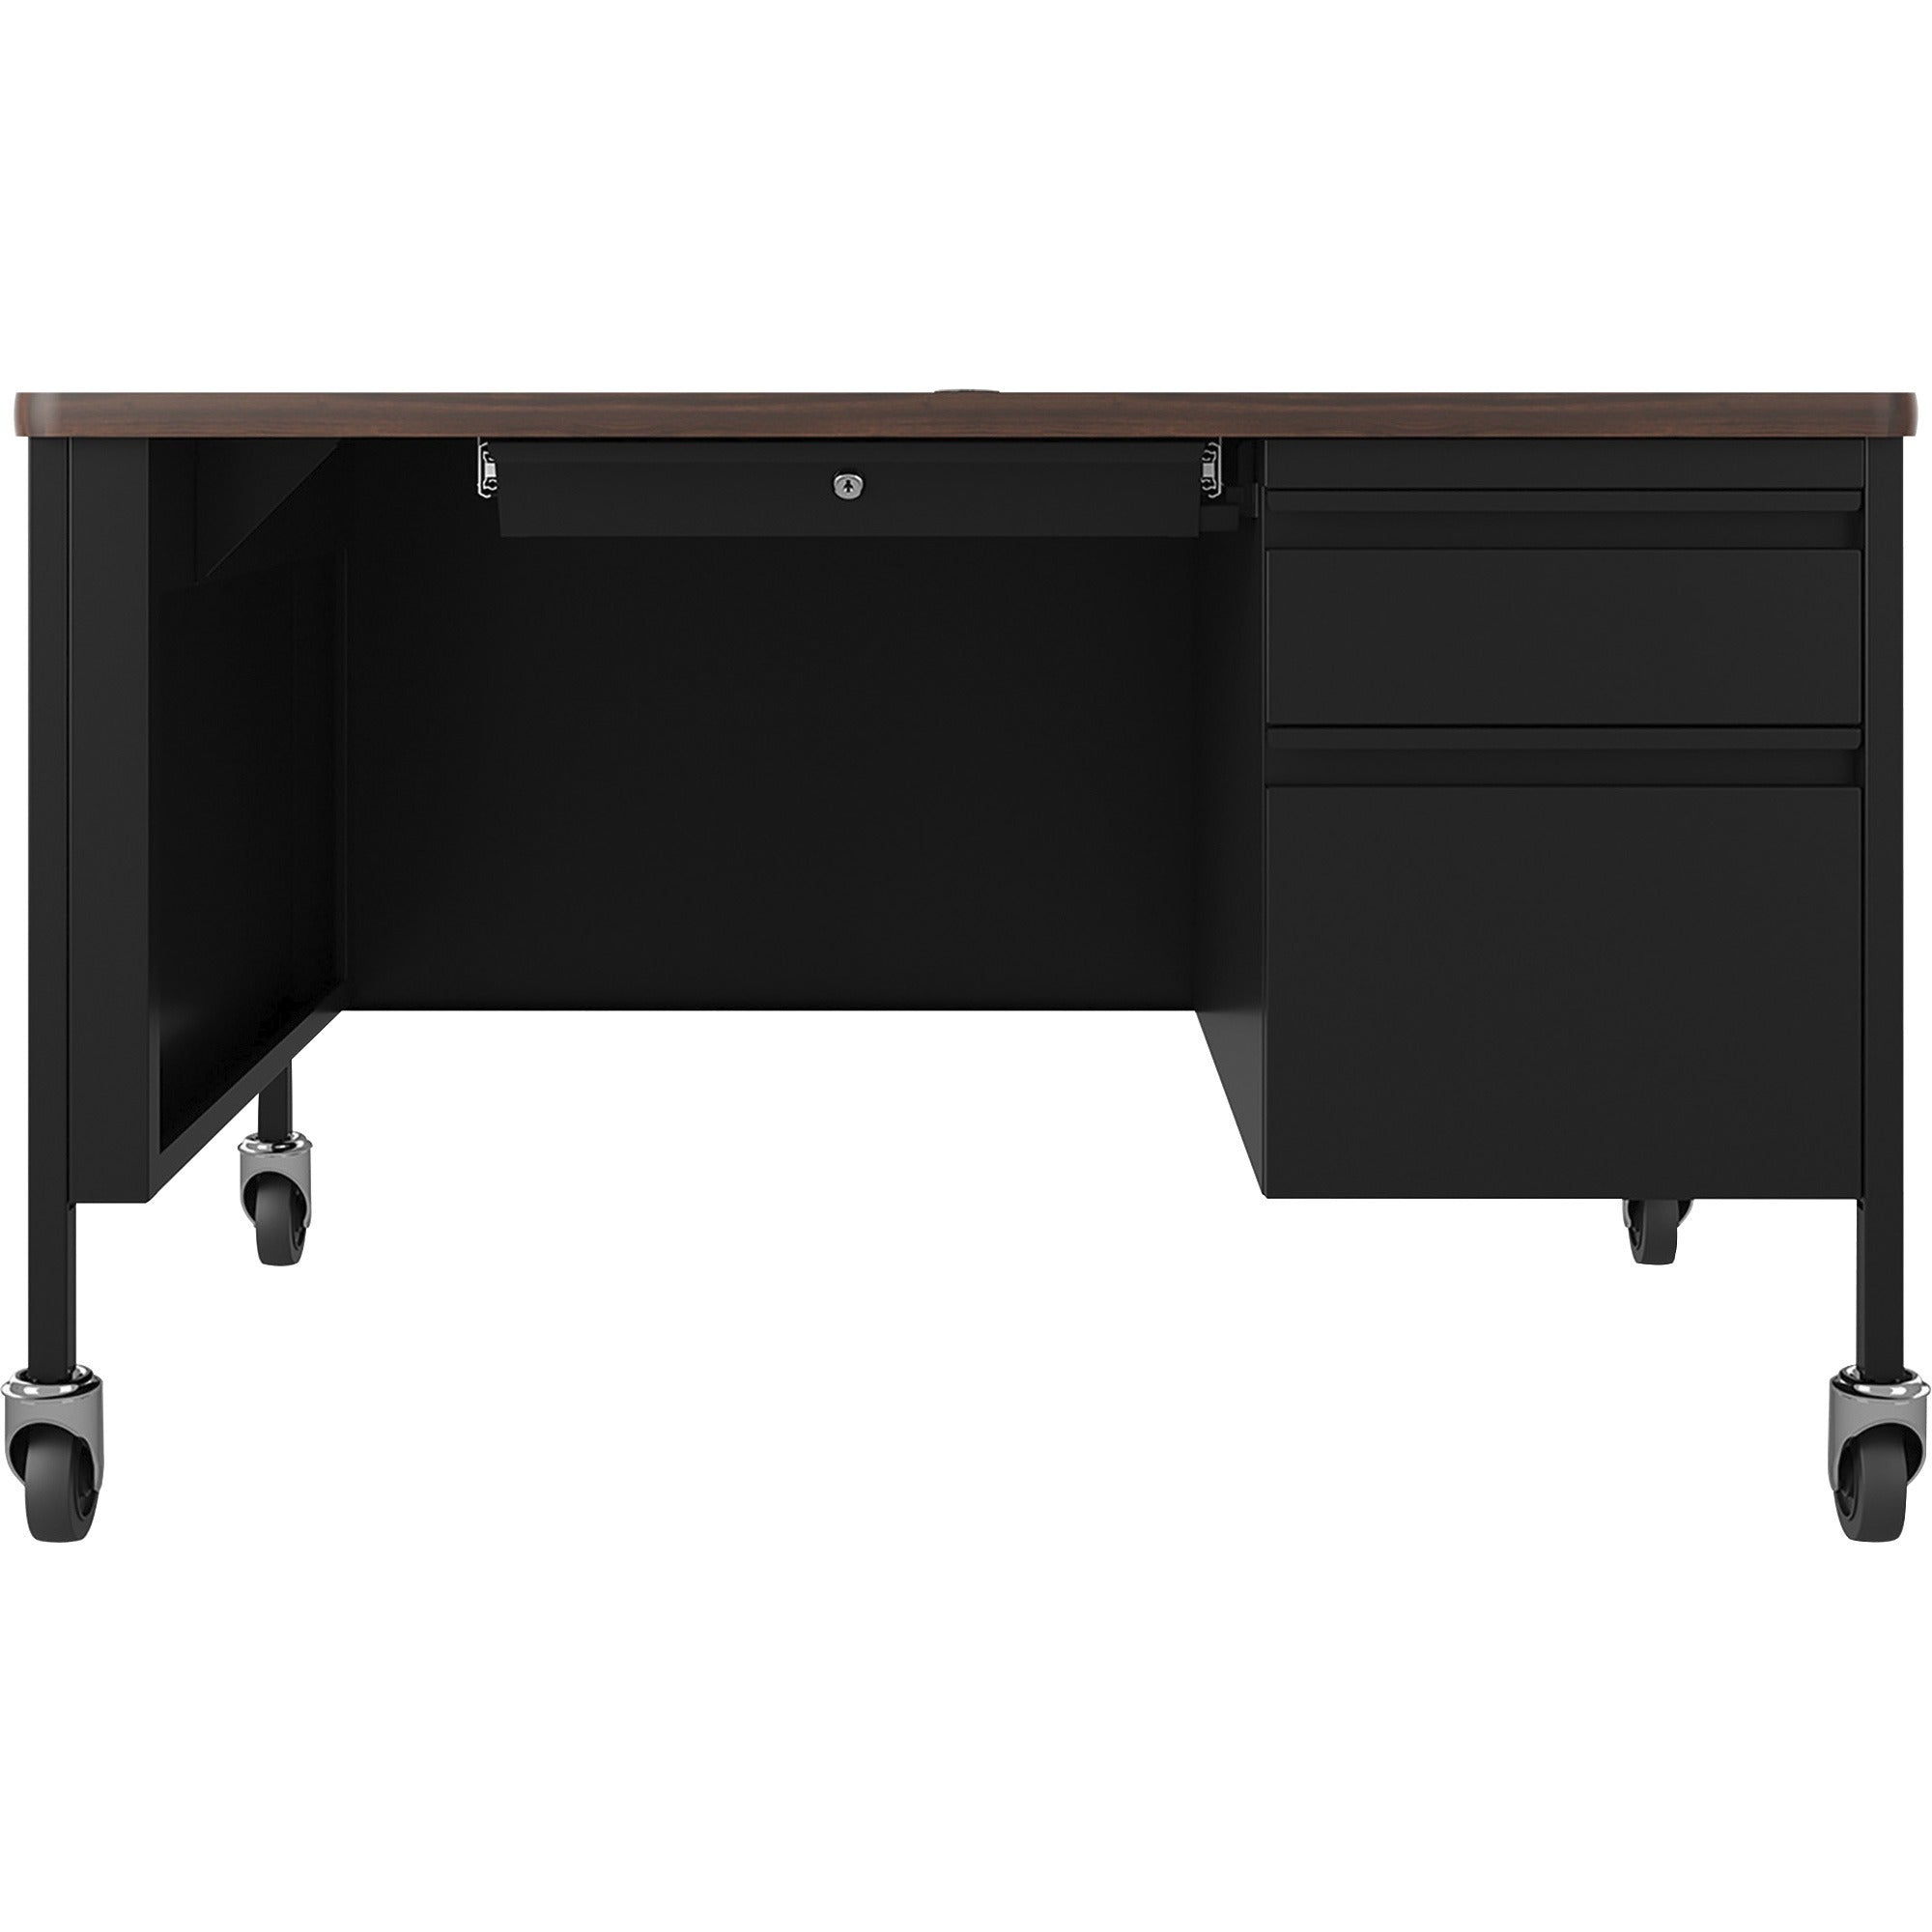 lorell-fortress-series-48-mobile-right-pedestal-teachers-desk-48-x-30295-box-file-drawers-single-pedestal-on-right-side-t-mold-edge_llr66943 - 2